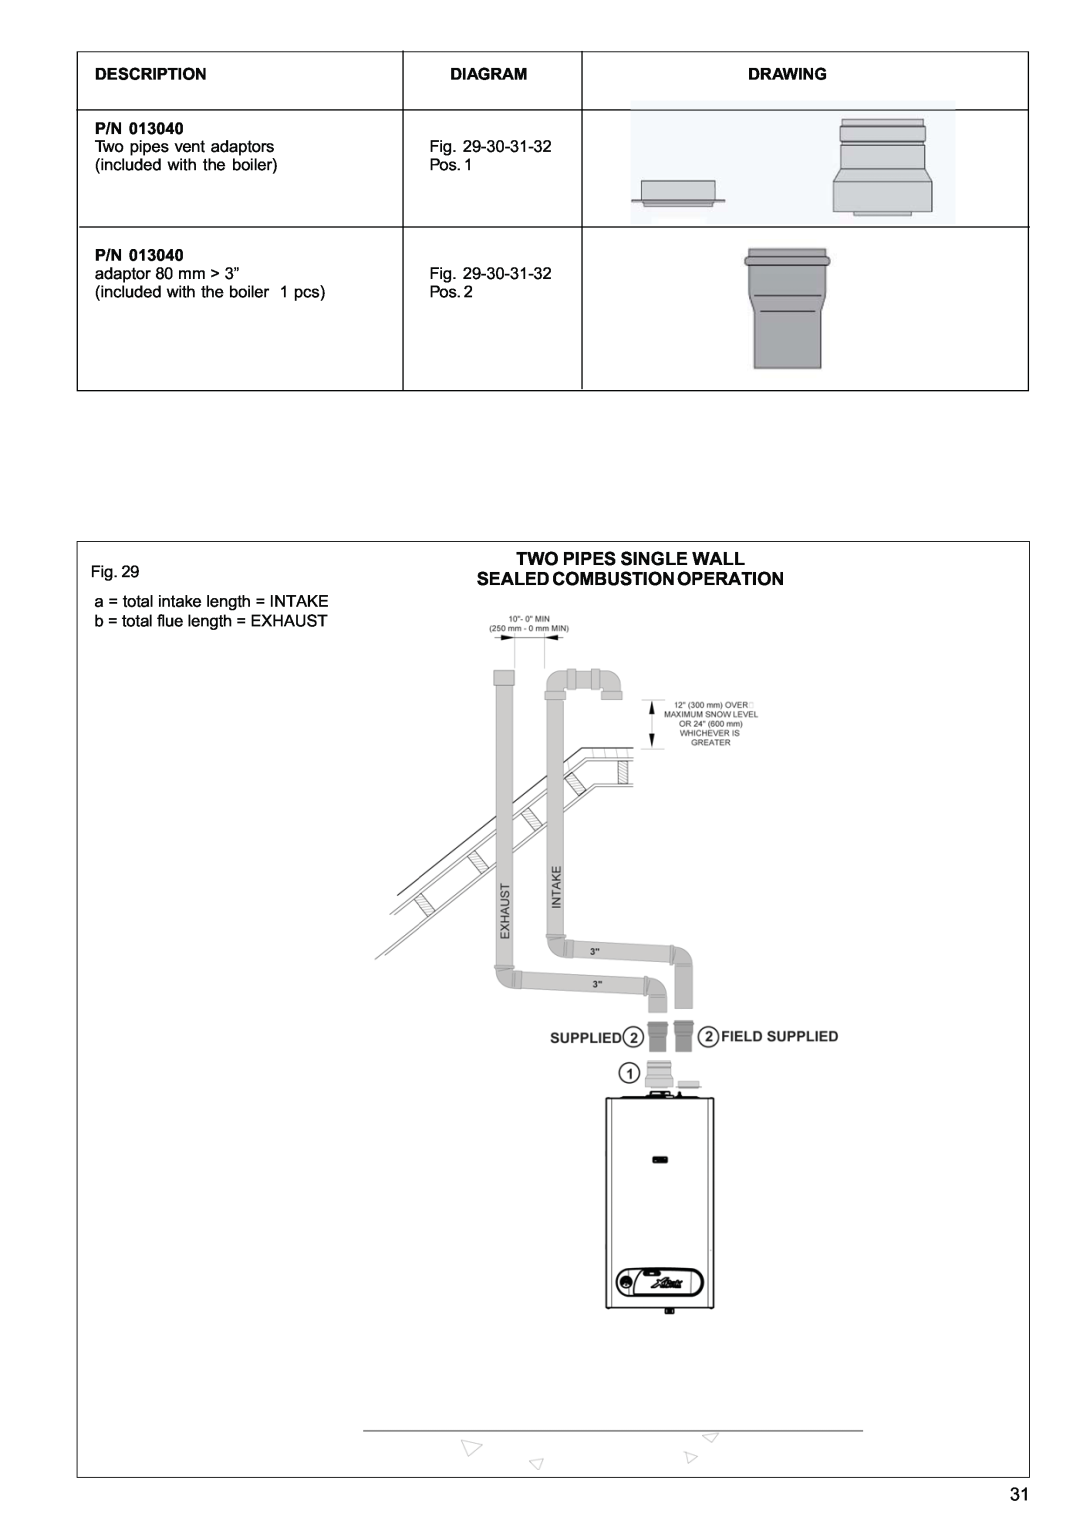 Raypak 120, 85 manual Two Pipes Single Wall, Sealed Combustion Operation, Description, Diagram, Drawing 